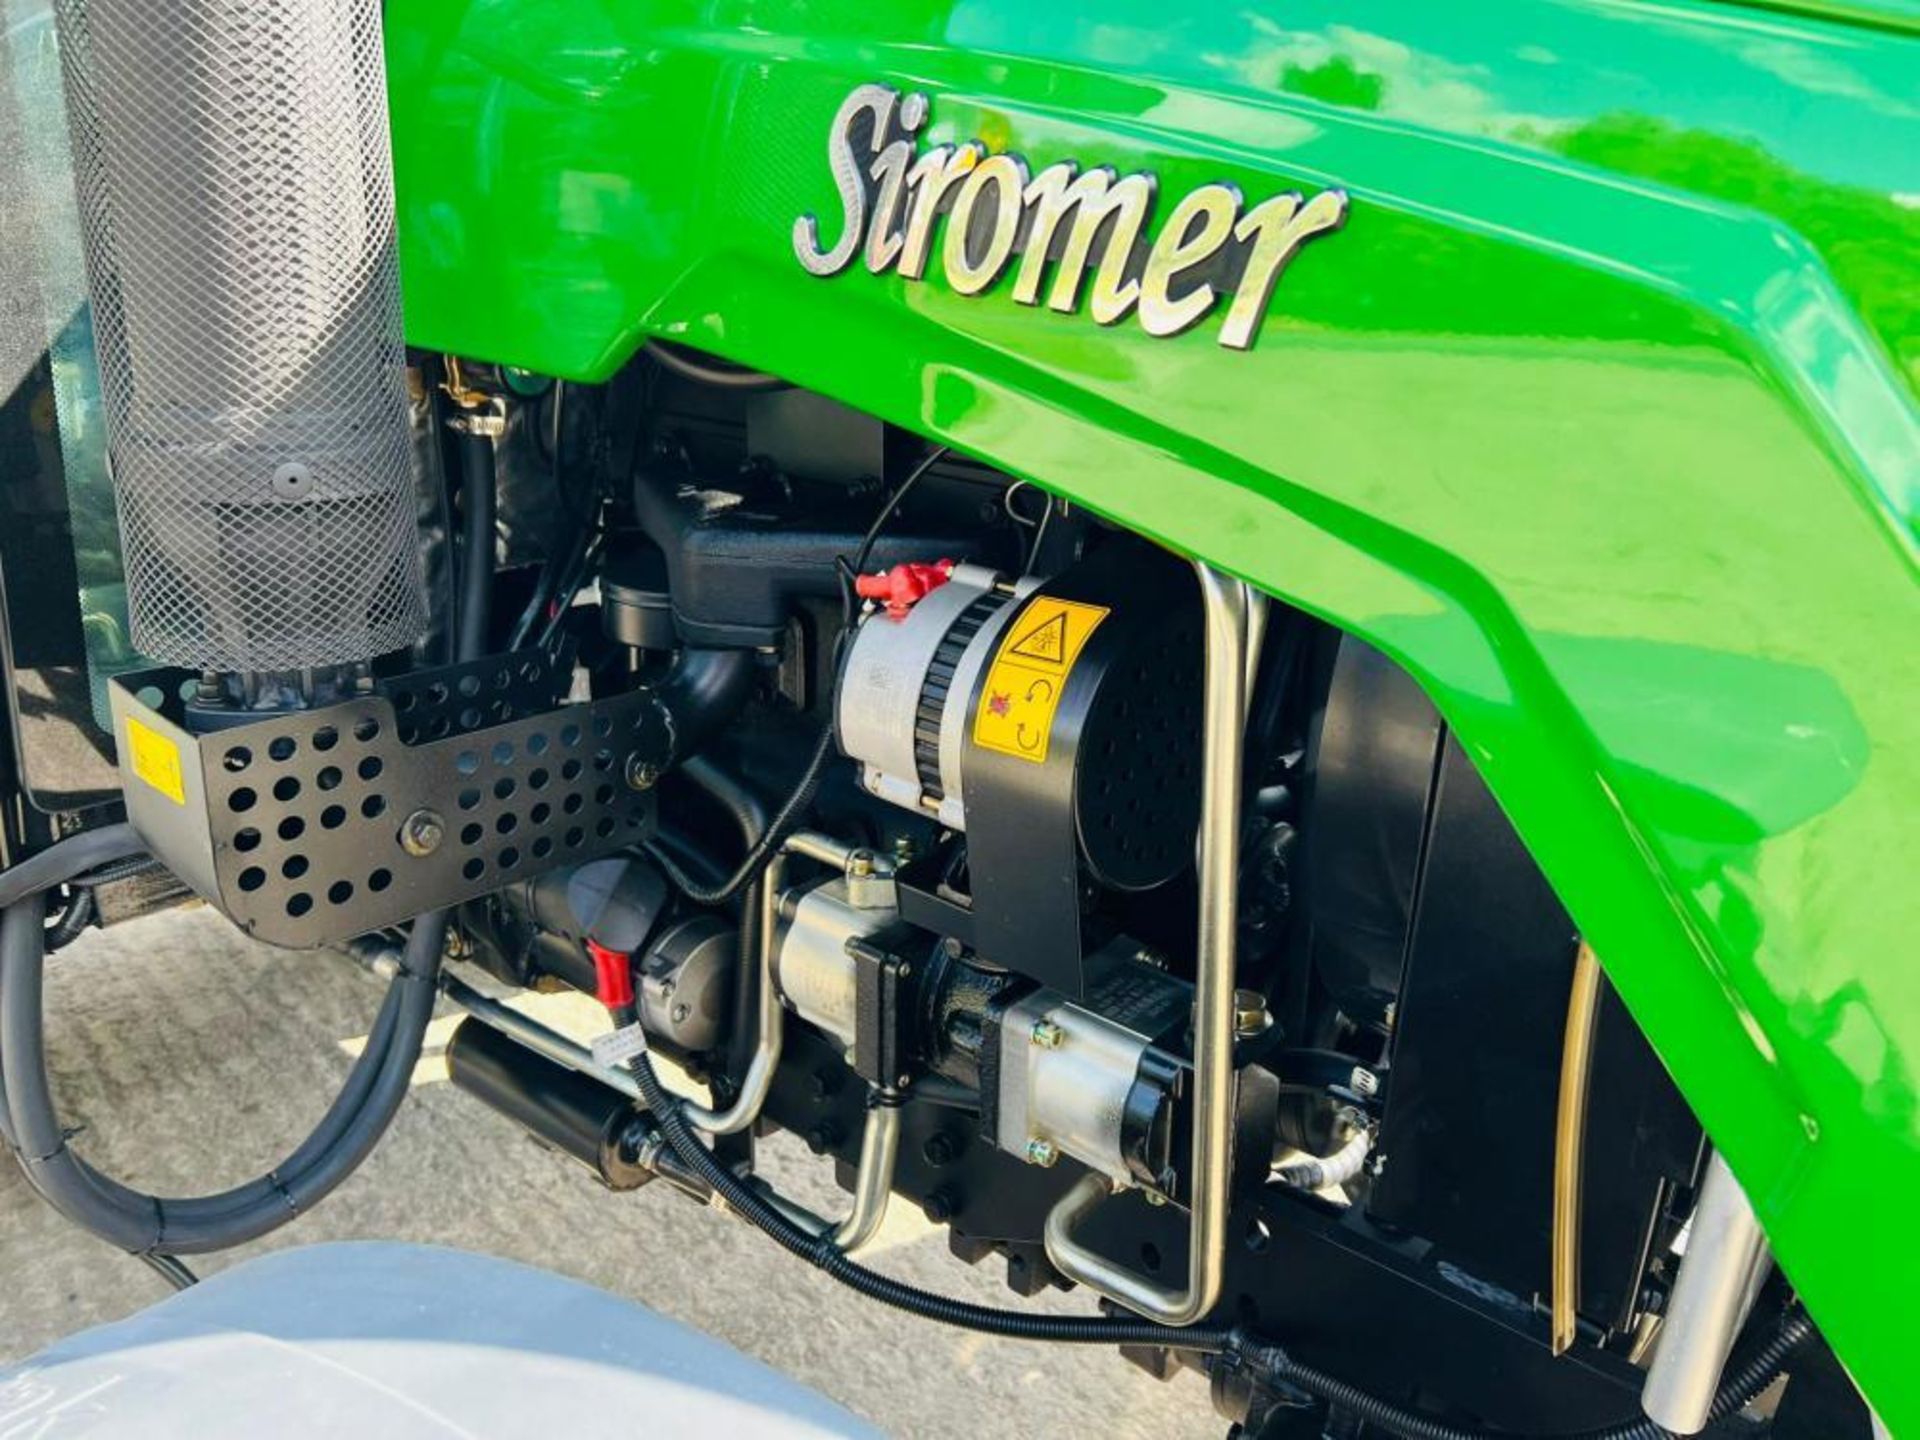 ** BRAND NEW SIROMER 404 4WD TRACTOR WITH SYNCHRO CAB ** - Image 10 of 17